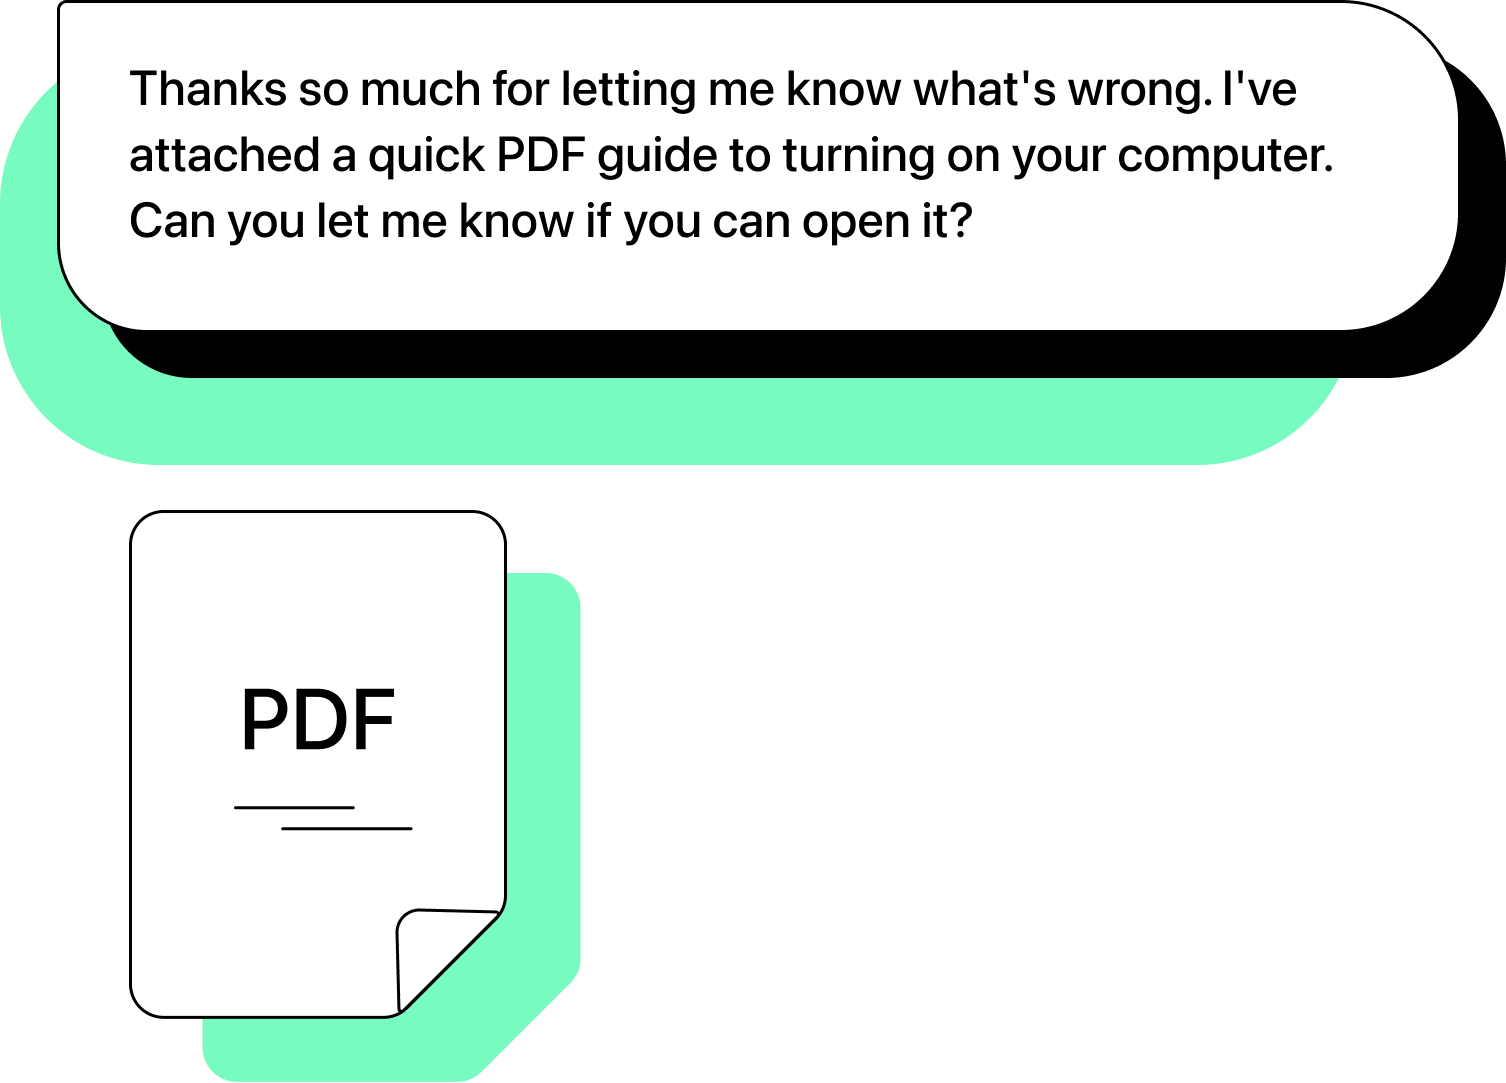 Business text with attached PDF that says: Thanks so much for letting me know what’s wrong. I’ve attached a quick PDF guide to turning on your computer. Can you let me know if you can open it?